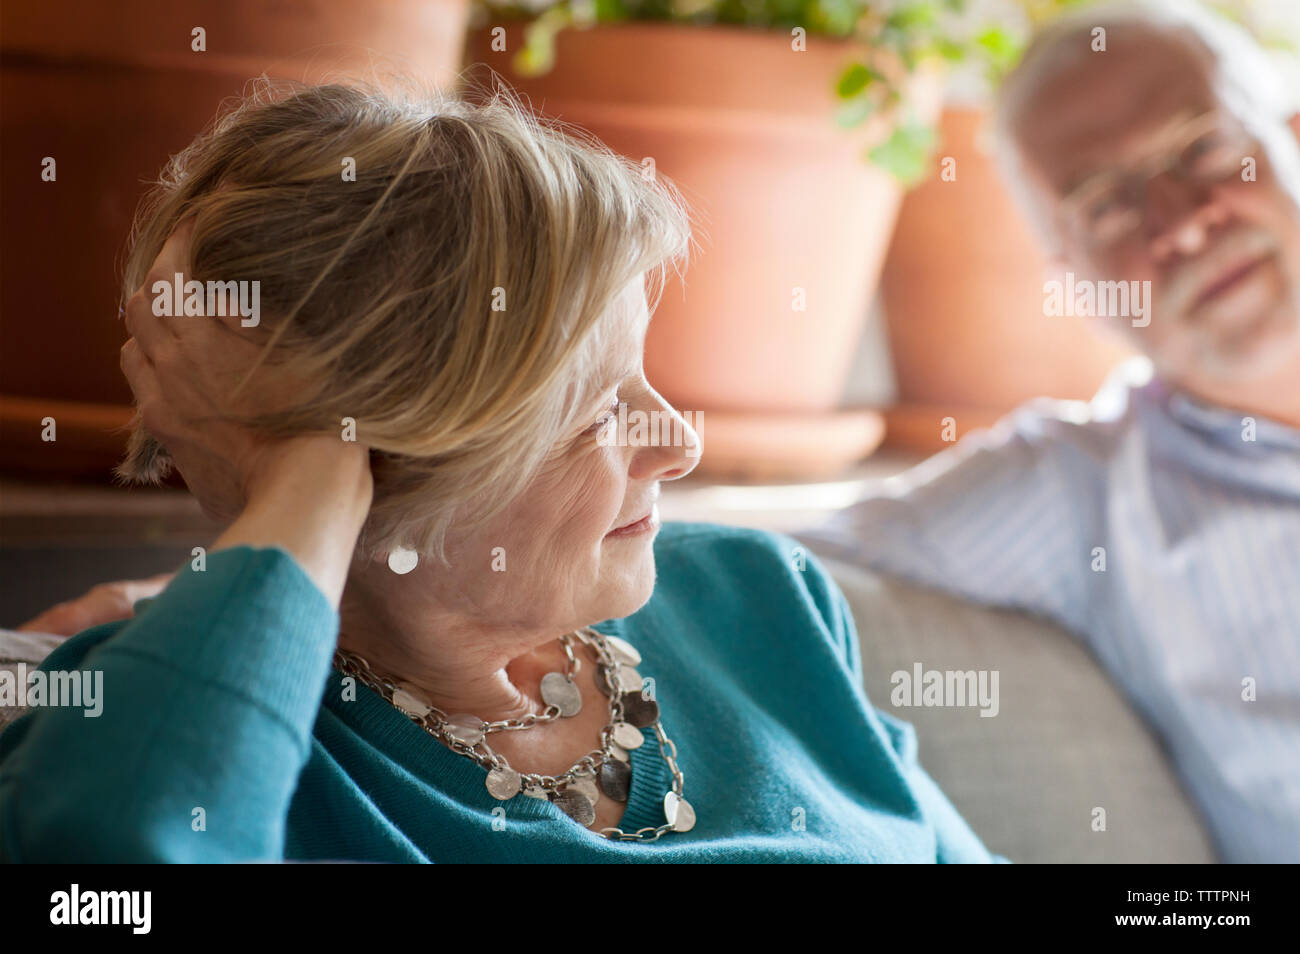 Senior couple sitting on sofa at home Banque D'Images